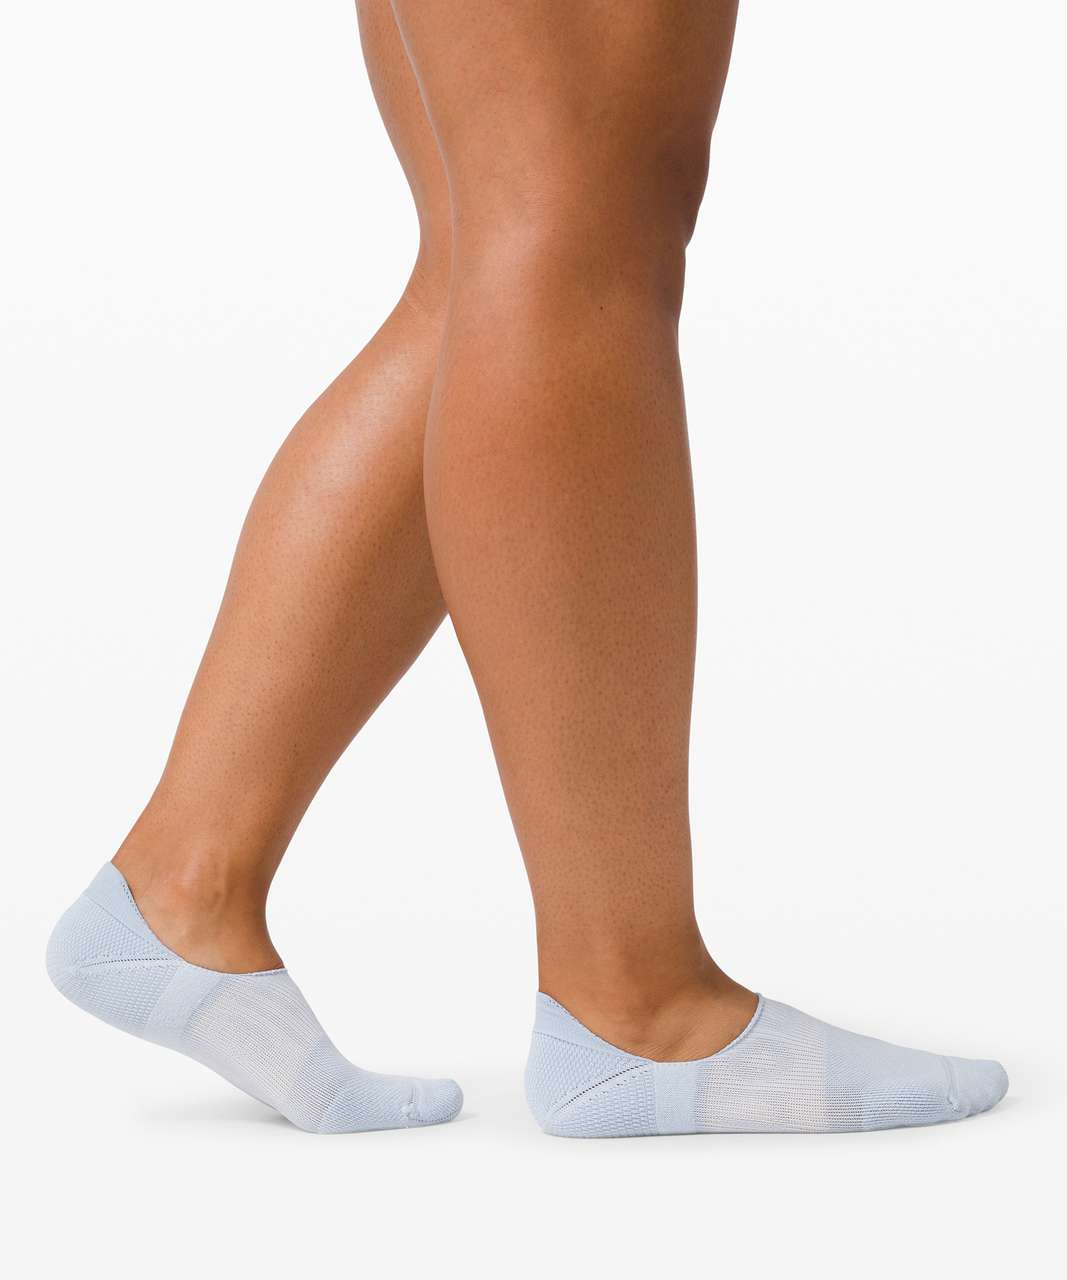 Lululemon Power Stride No-Show Sock with Active Grip *3 Pack - White / Blue Linen / Black